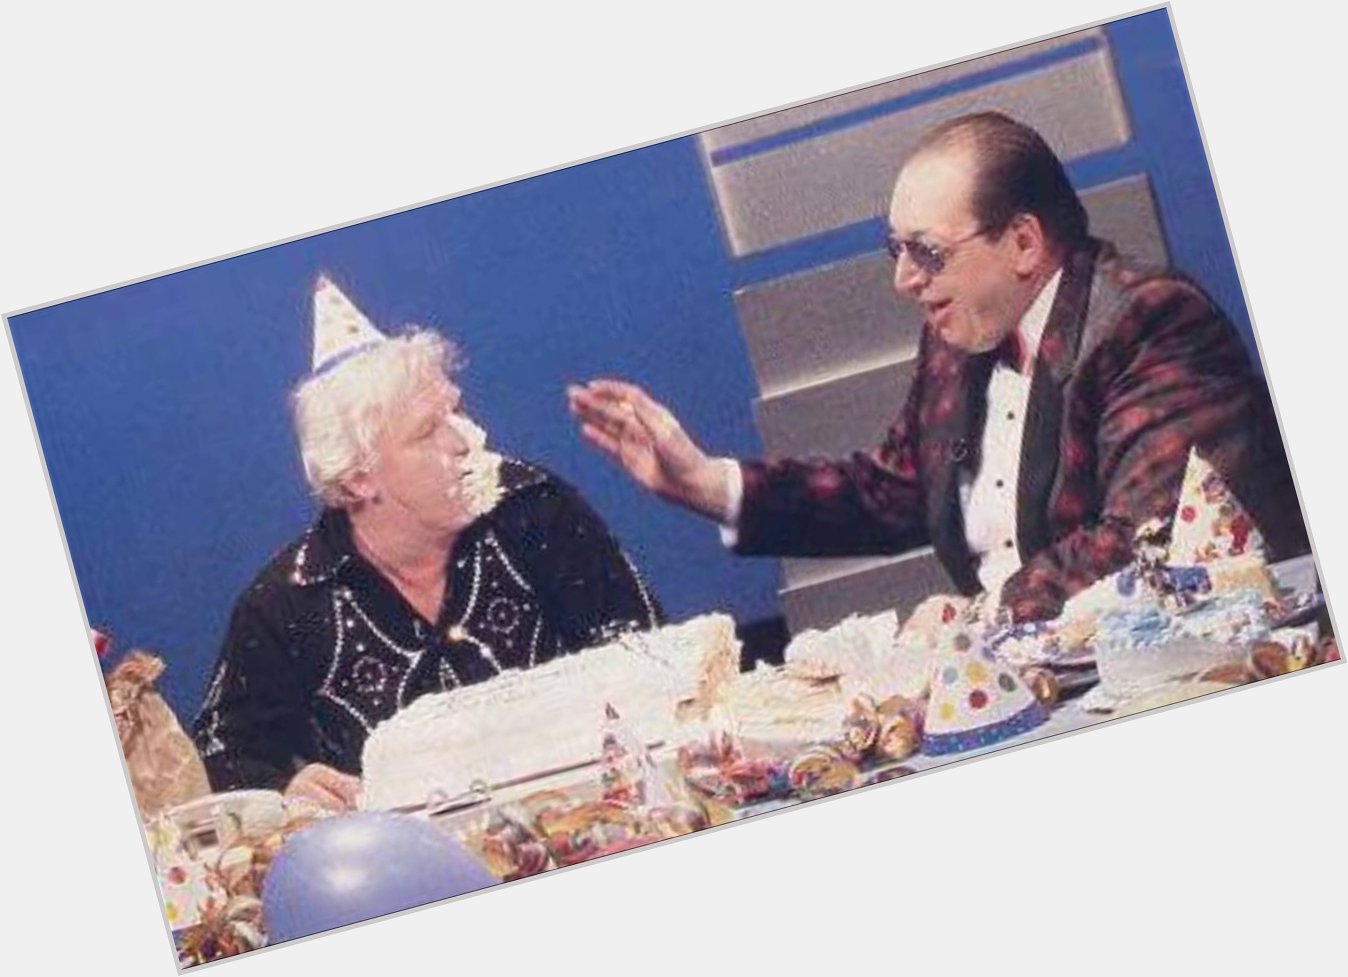 Happy Birthday Gorilla Monsoon, they re hanging from the rafters at the party in heaven right now! 